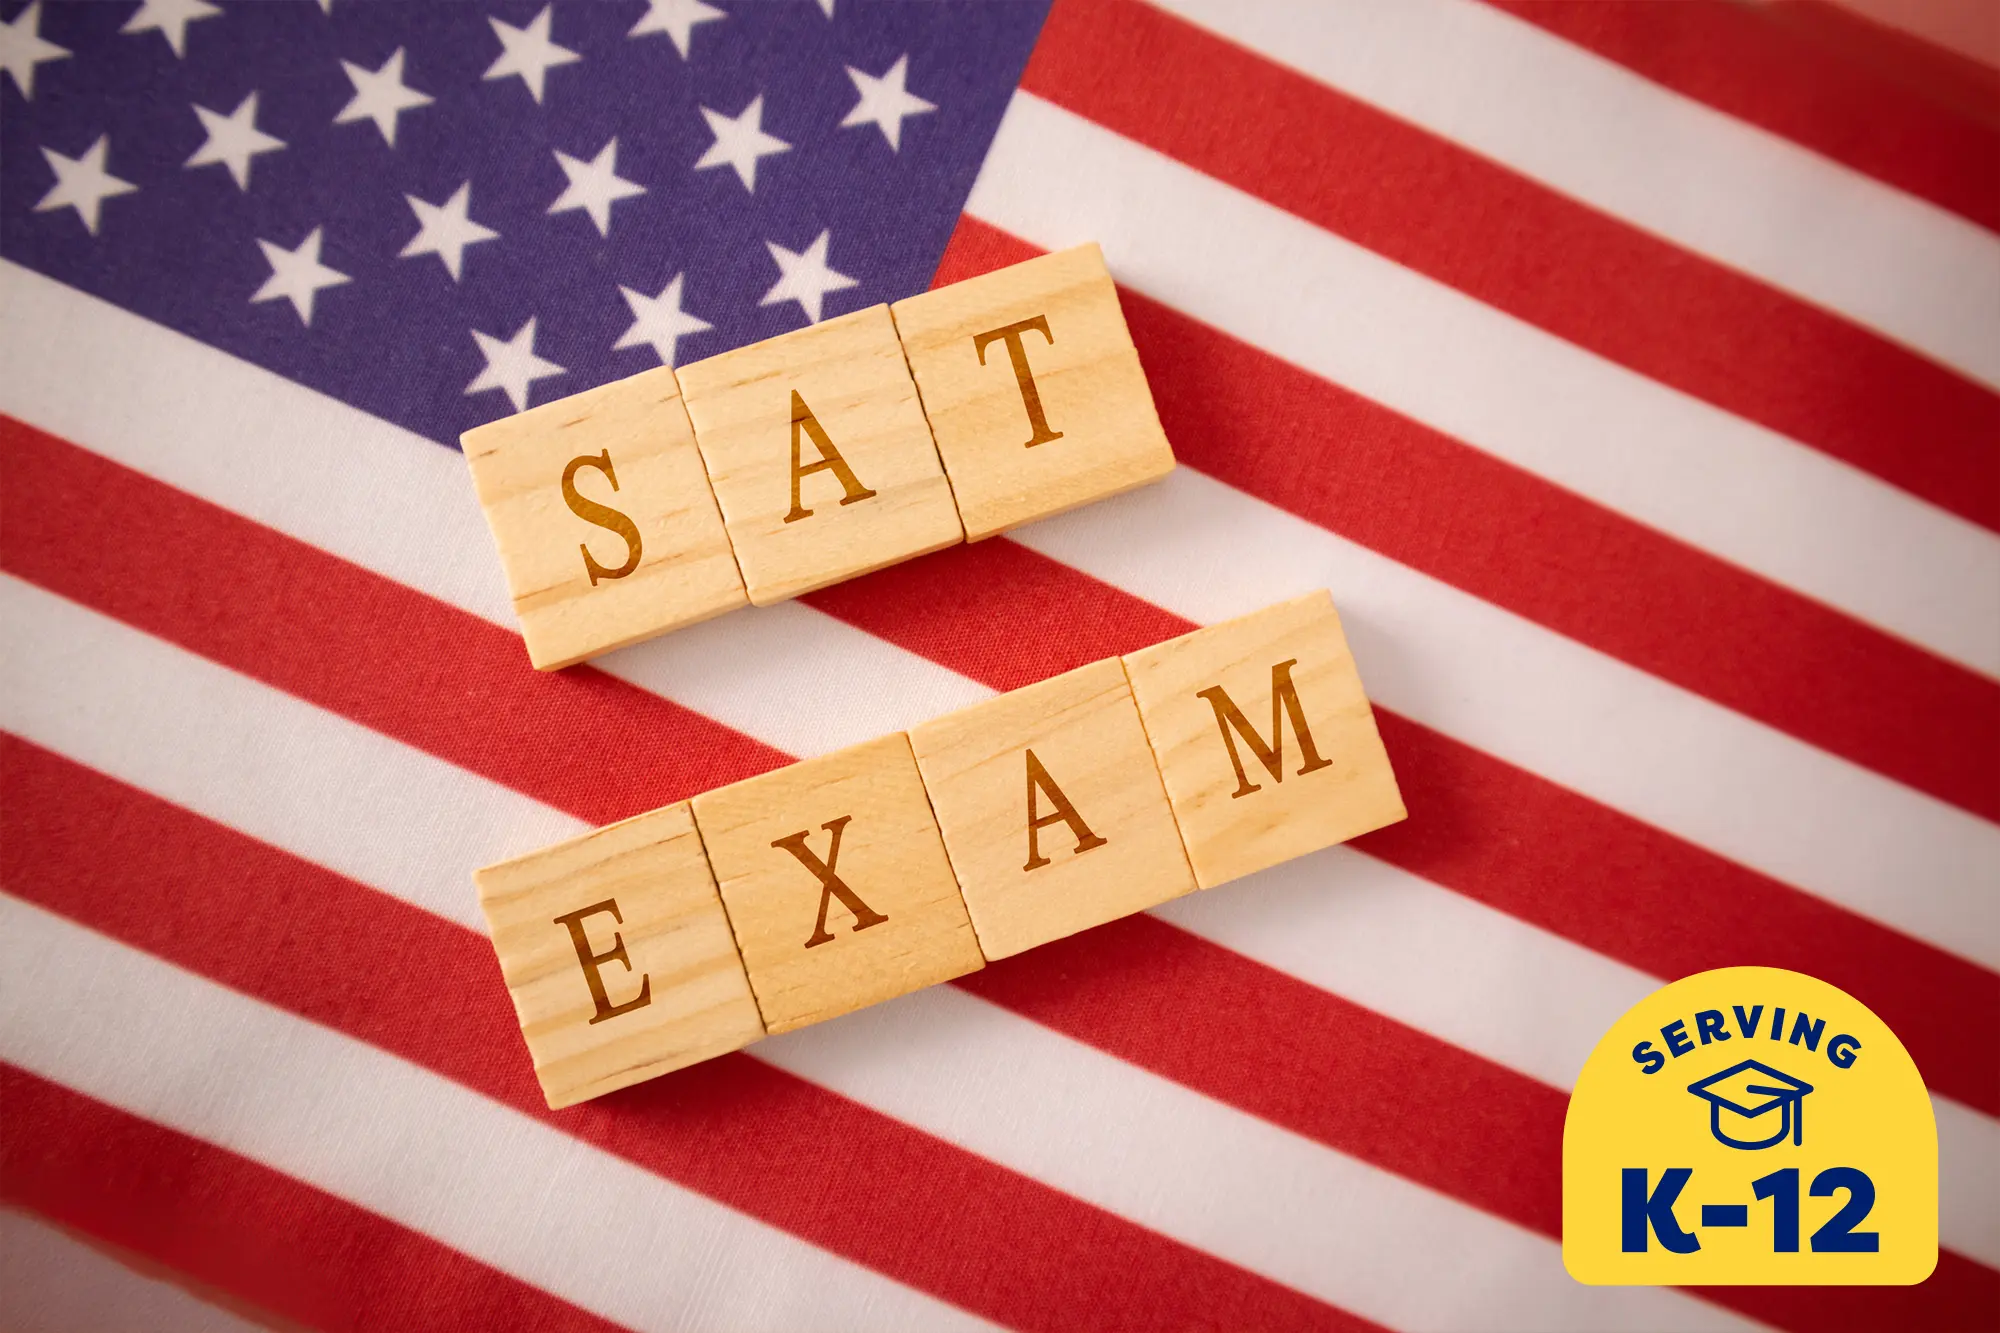 SAT EXAM spelt out using wooden tiles on an American flag